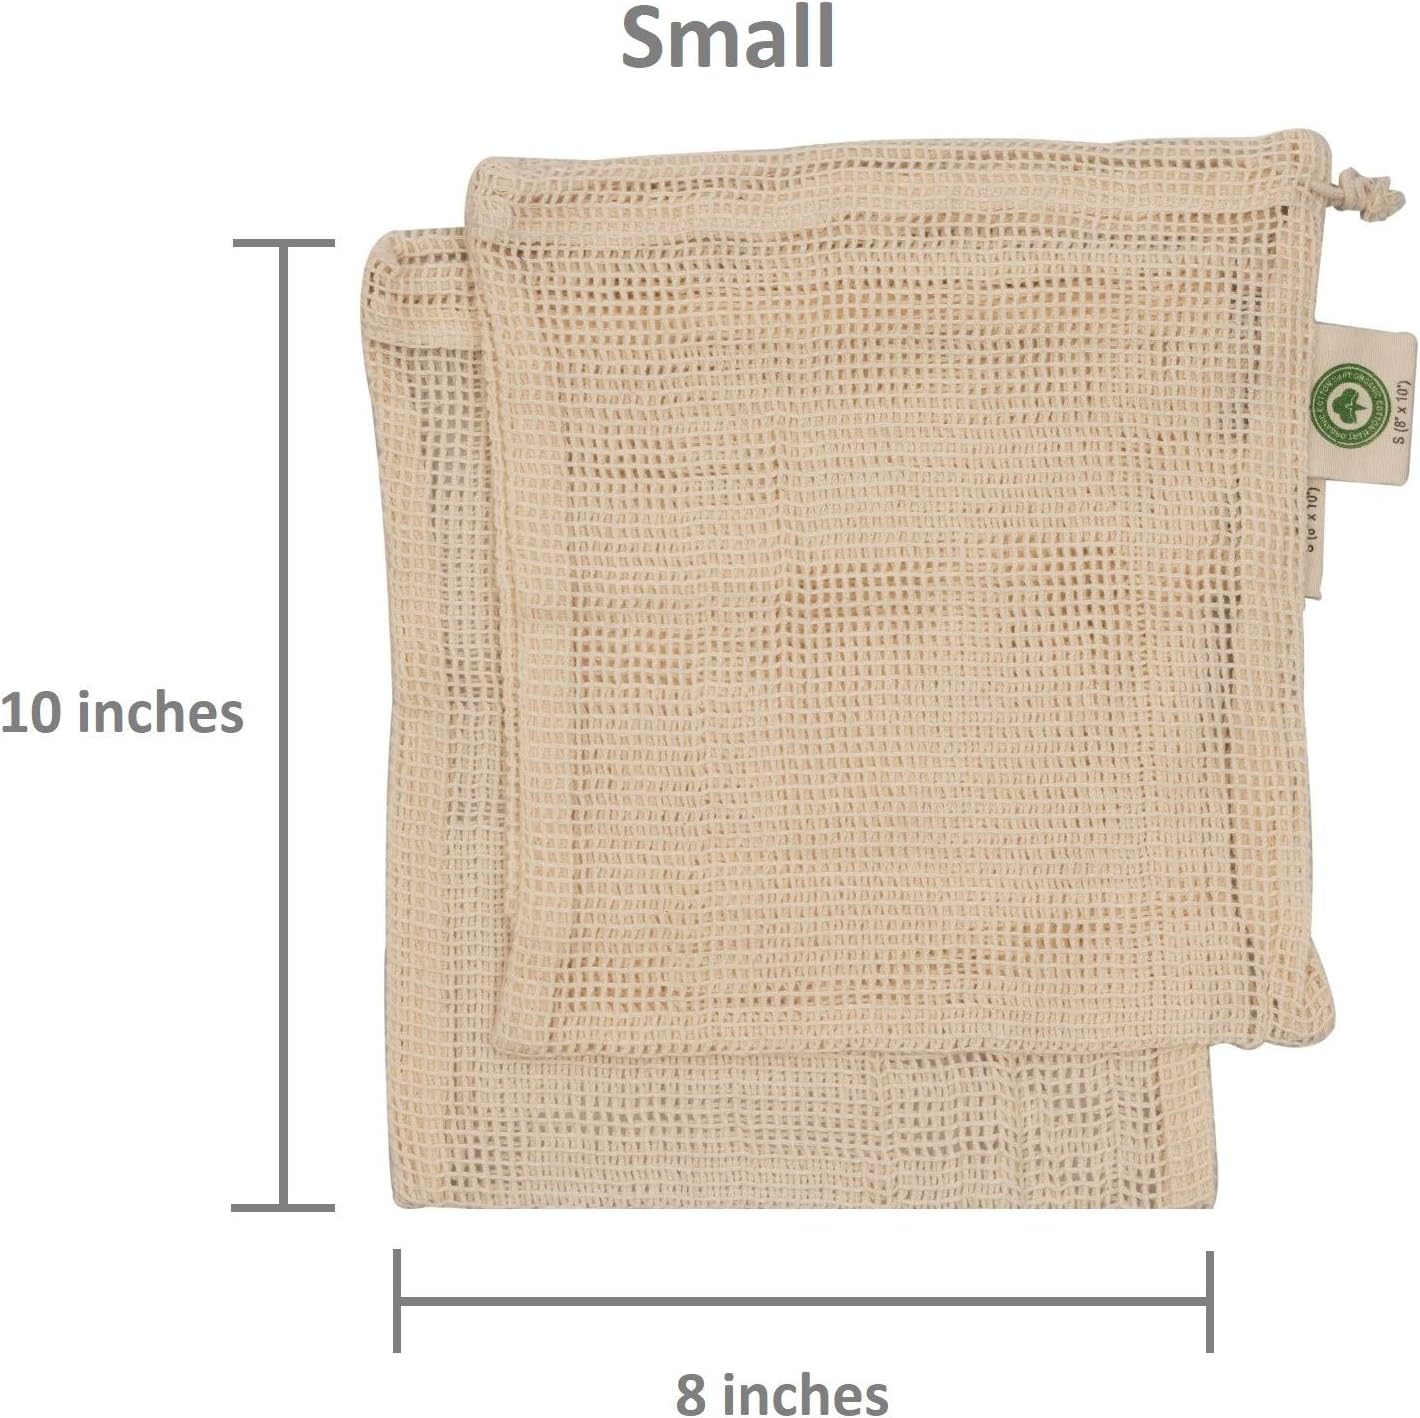 Reusable Cotton Mesh Produce Bags - 100% Organic Cotton, Durable, Double Stitched, Washable with Tare Weight & Drawstring - Mesh Bags for Grocery Shopping, Vegetables & Fruits | 6 Bags (2L, 2M, 2S)